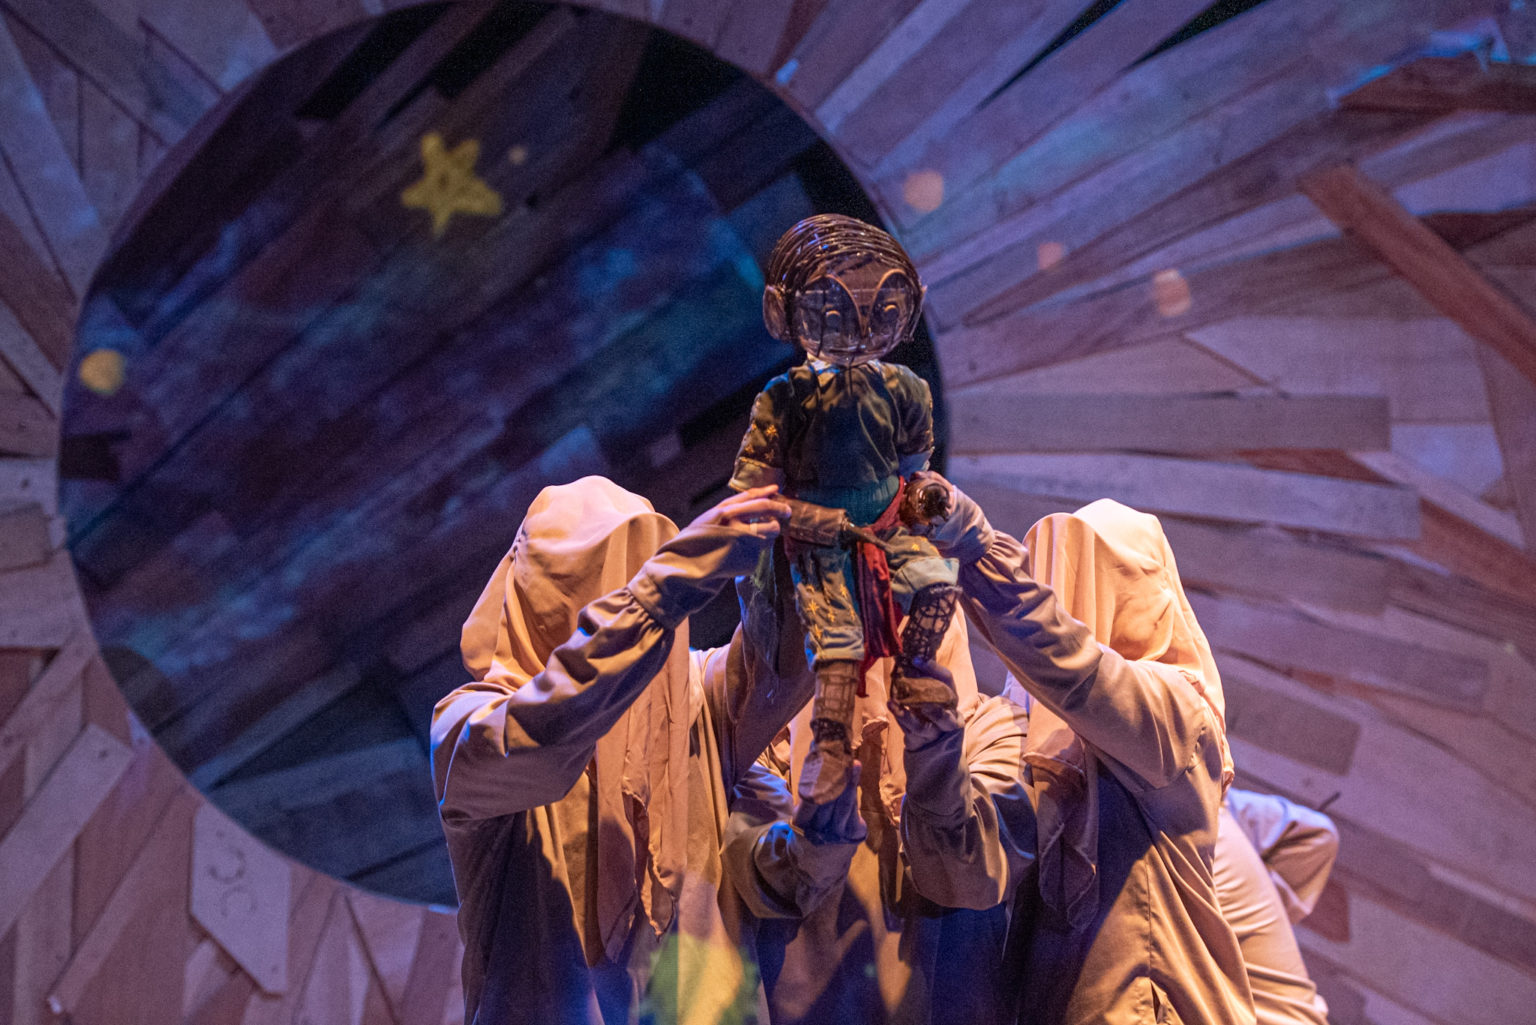 REVIEW: ‘Prinsipe Bahaghari’ is a profoundly performed puppet show